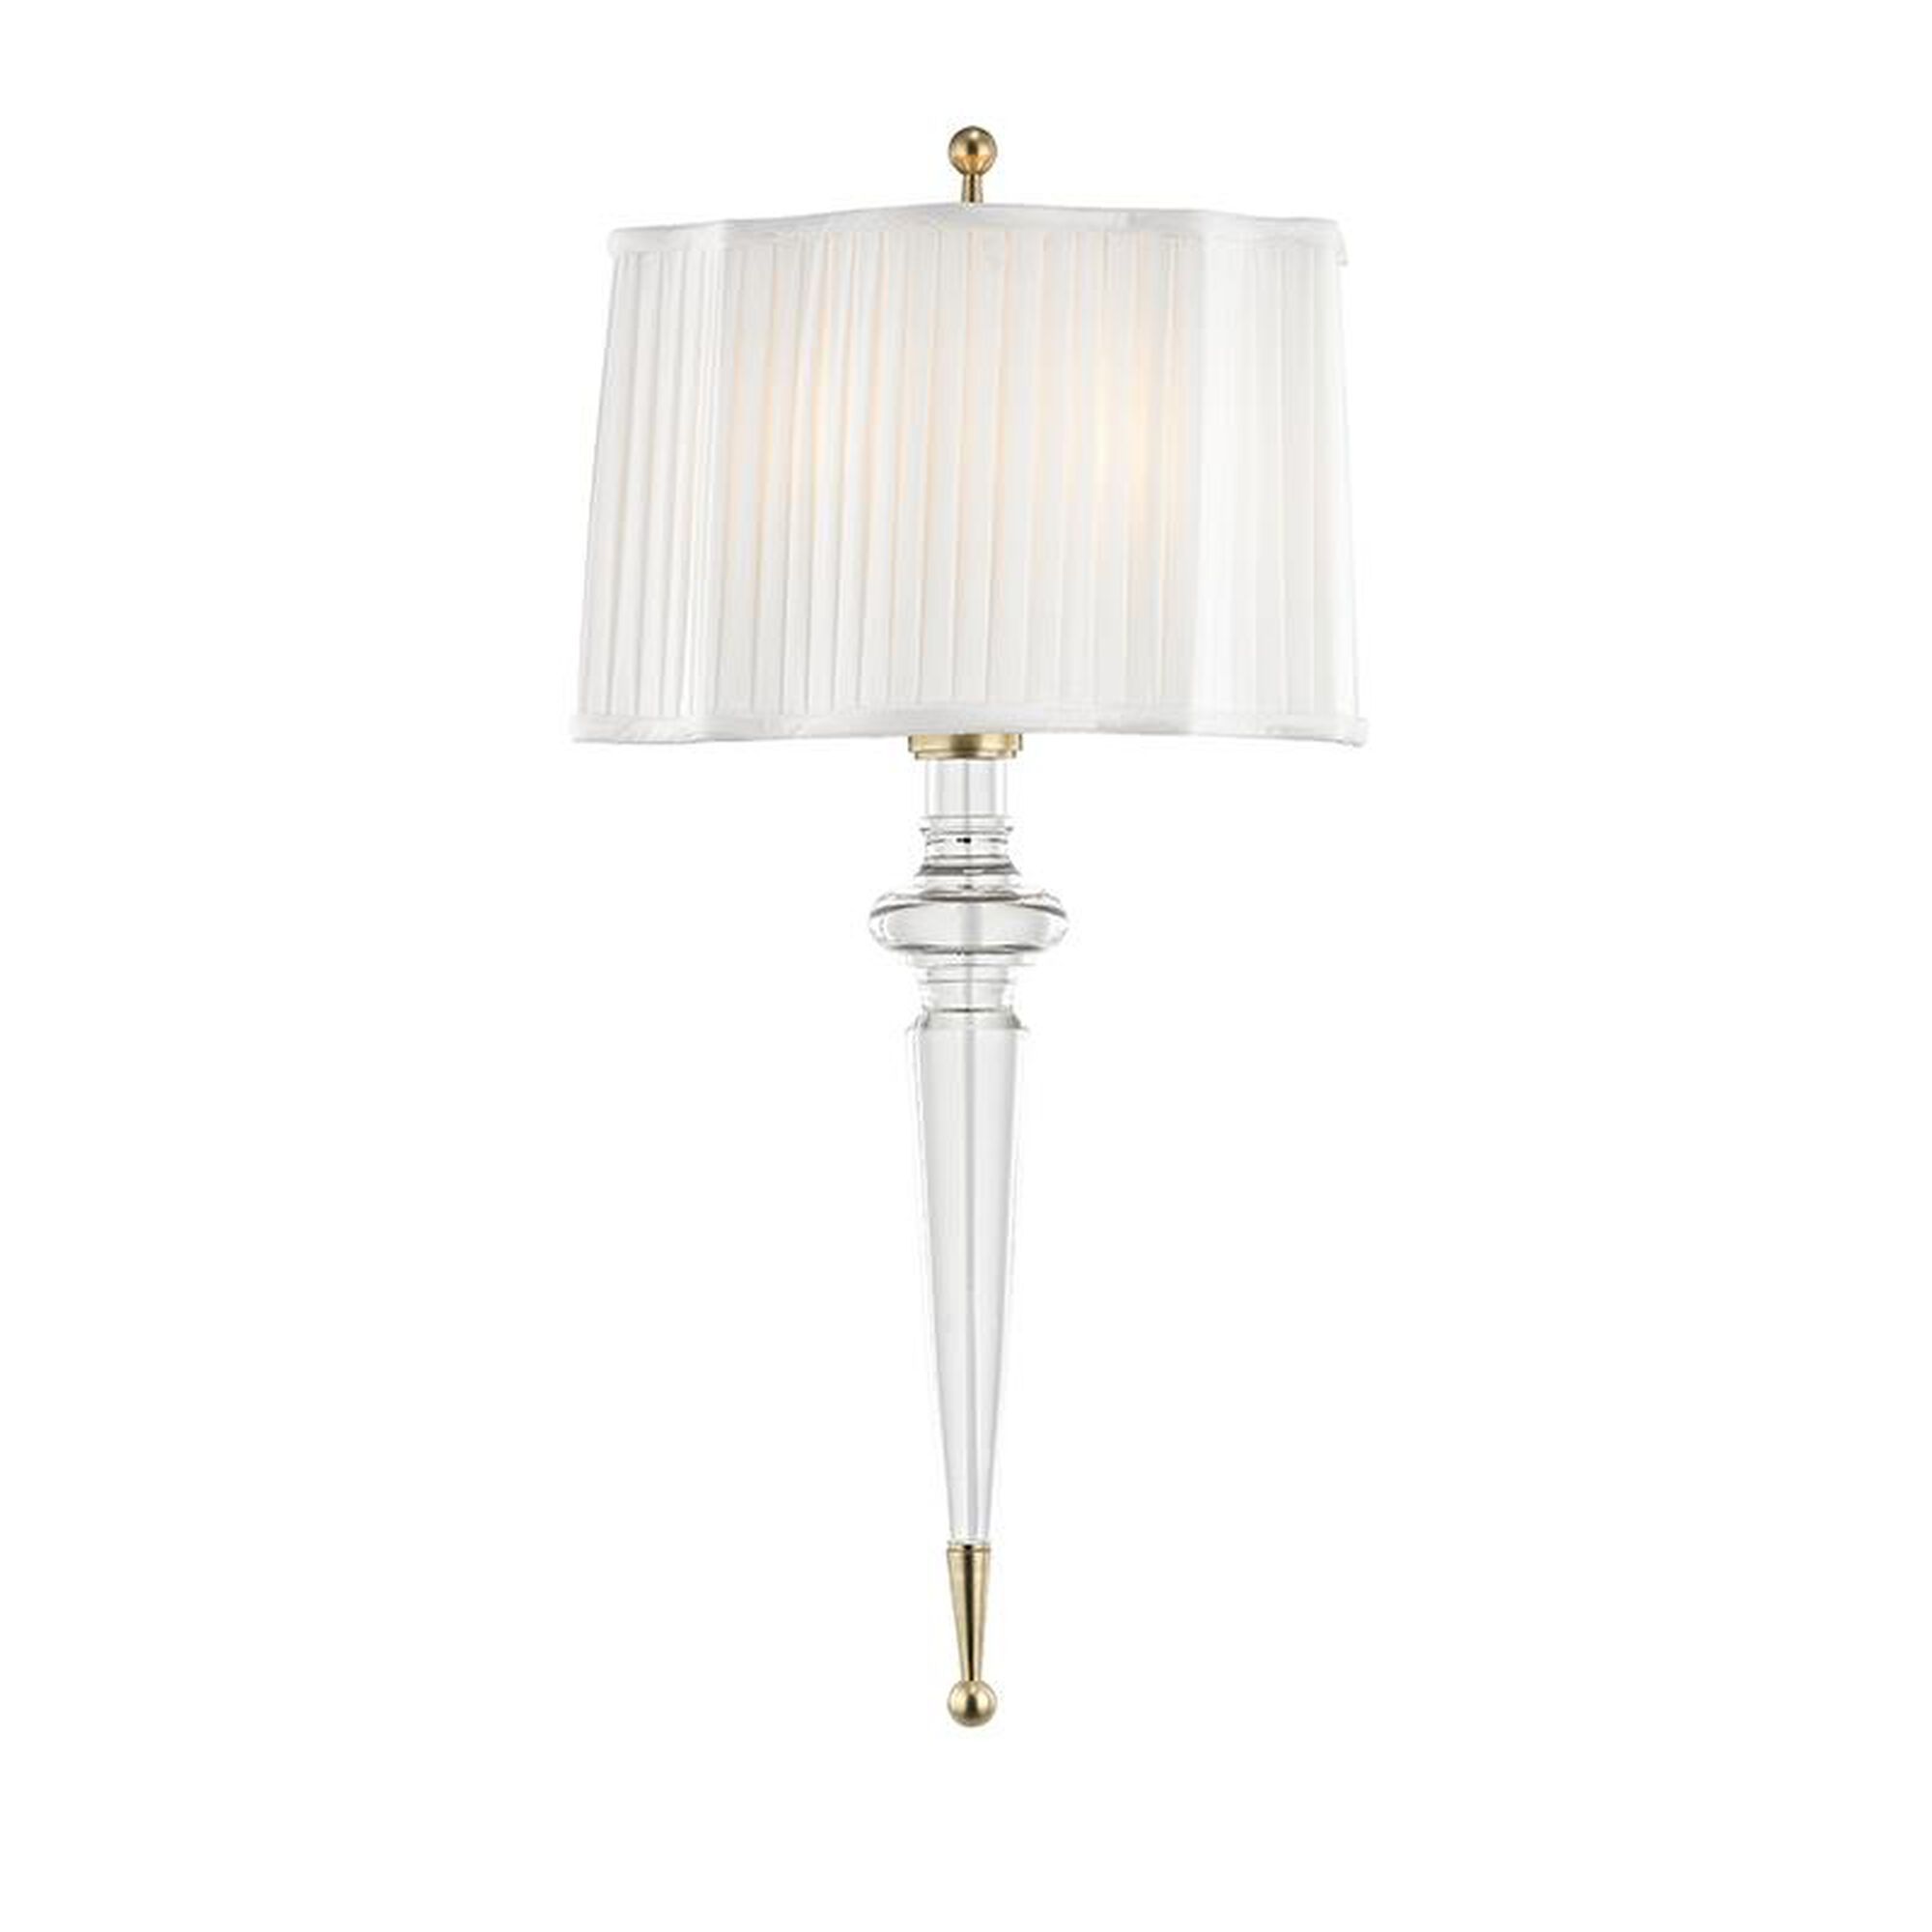 Tipton 24 Inch Wall Sconce by Hudson Valley Lighting | 1800 Lighting